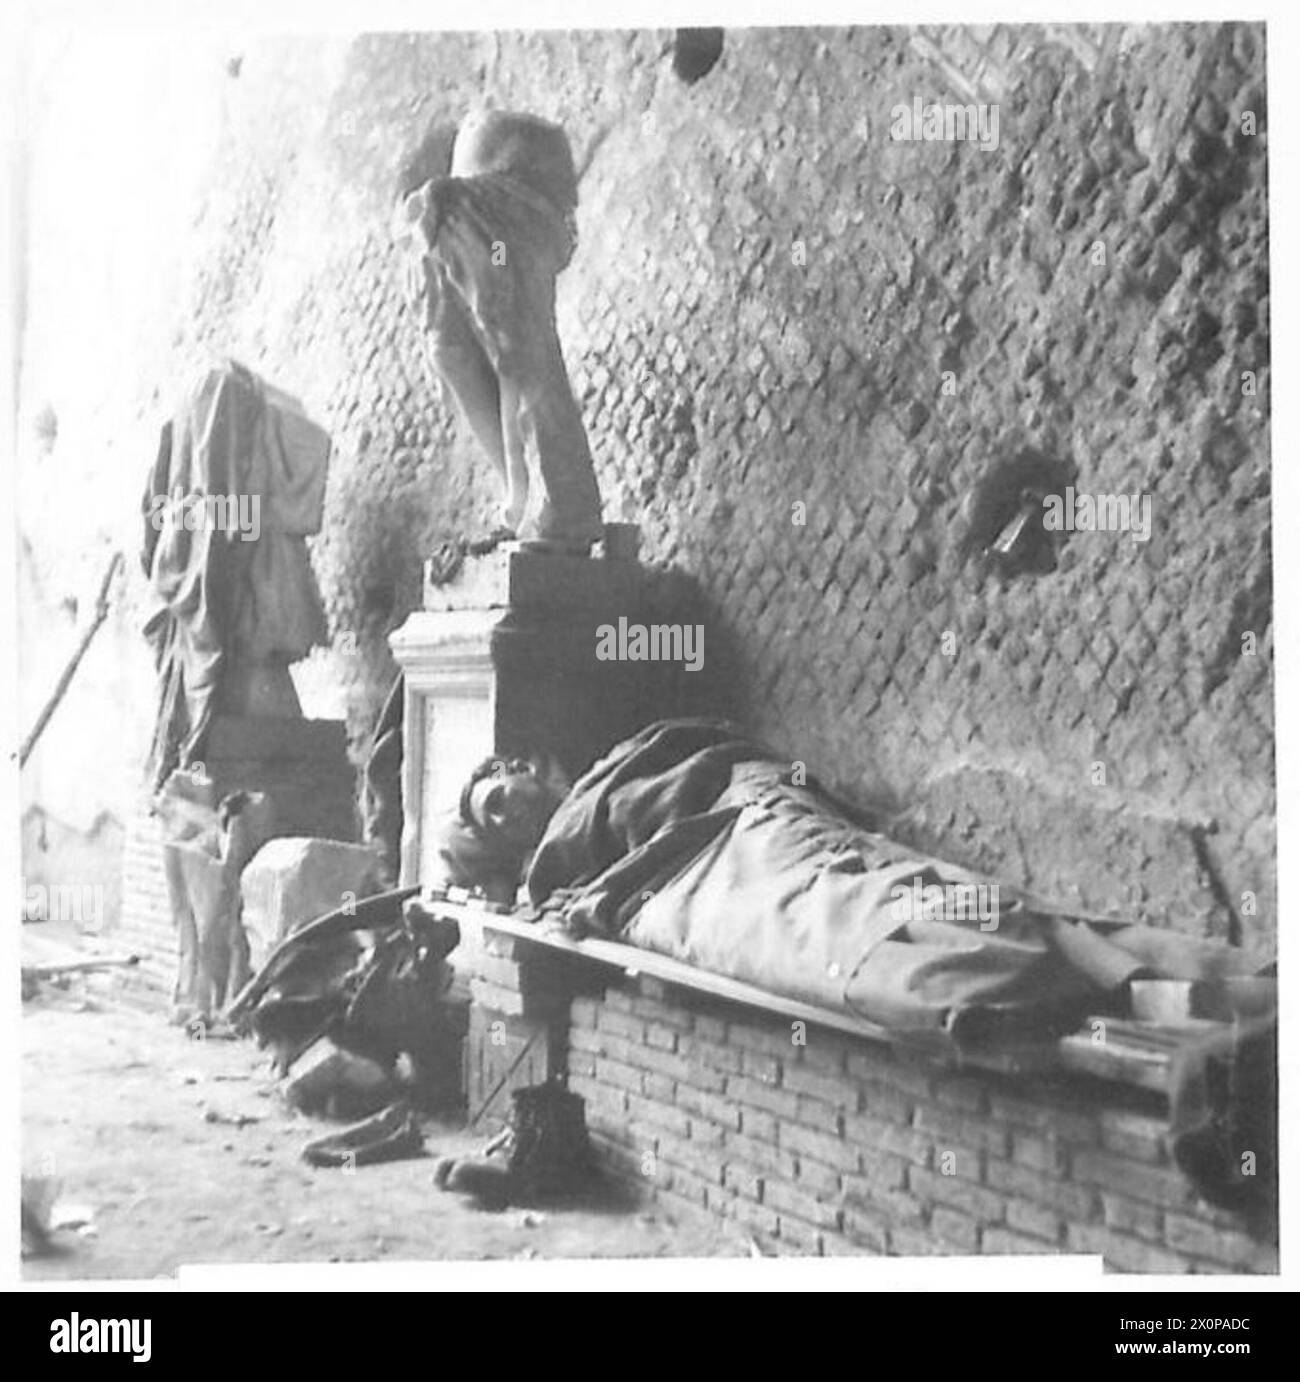 THE BRITISH ARMY IN NORTH AFRICA, SICILY, ITALY, THE BALKANS AND AUSTRIA 1942-1946 - After a night patrol activity, Rfn. H. Stanborough of Wlathamstow, London, sleeps contentedly under the shadow of a statue. Photographic negative , British Army Stock Photo